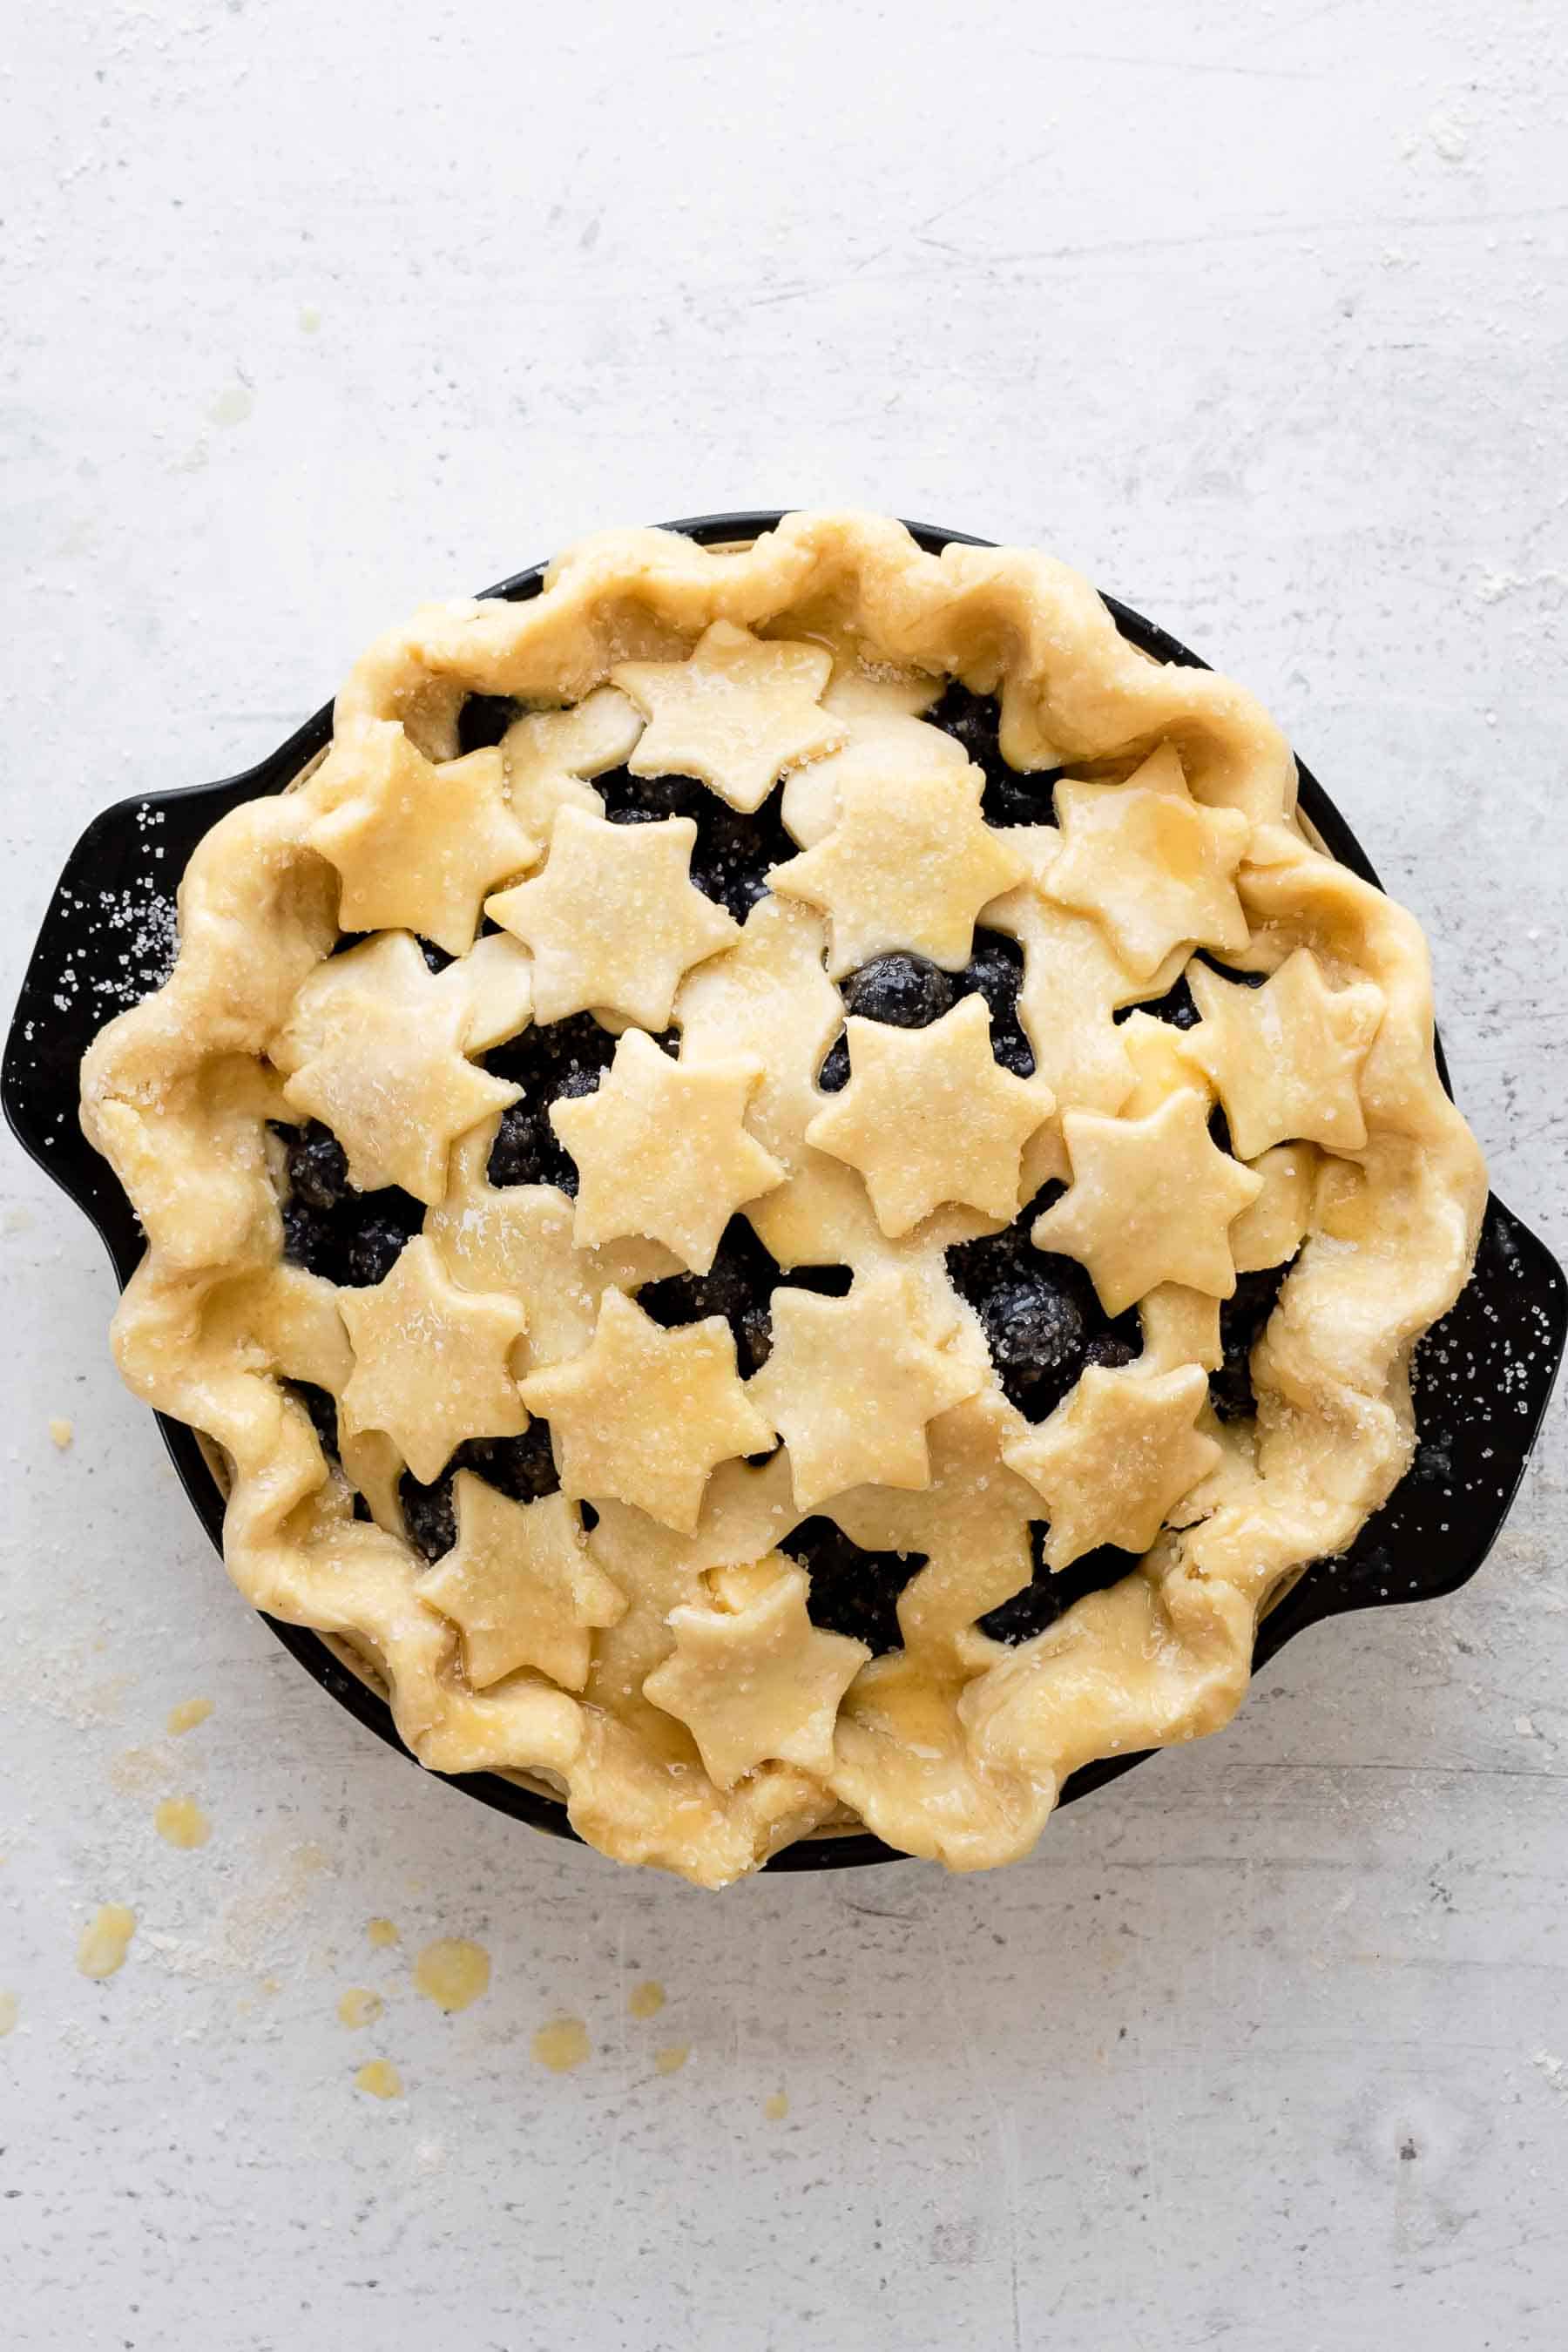 star shaped crust on a blueberry pie